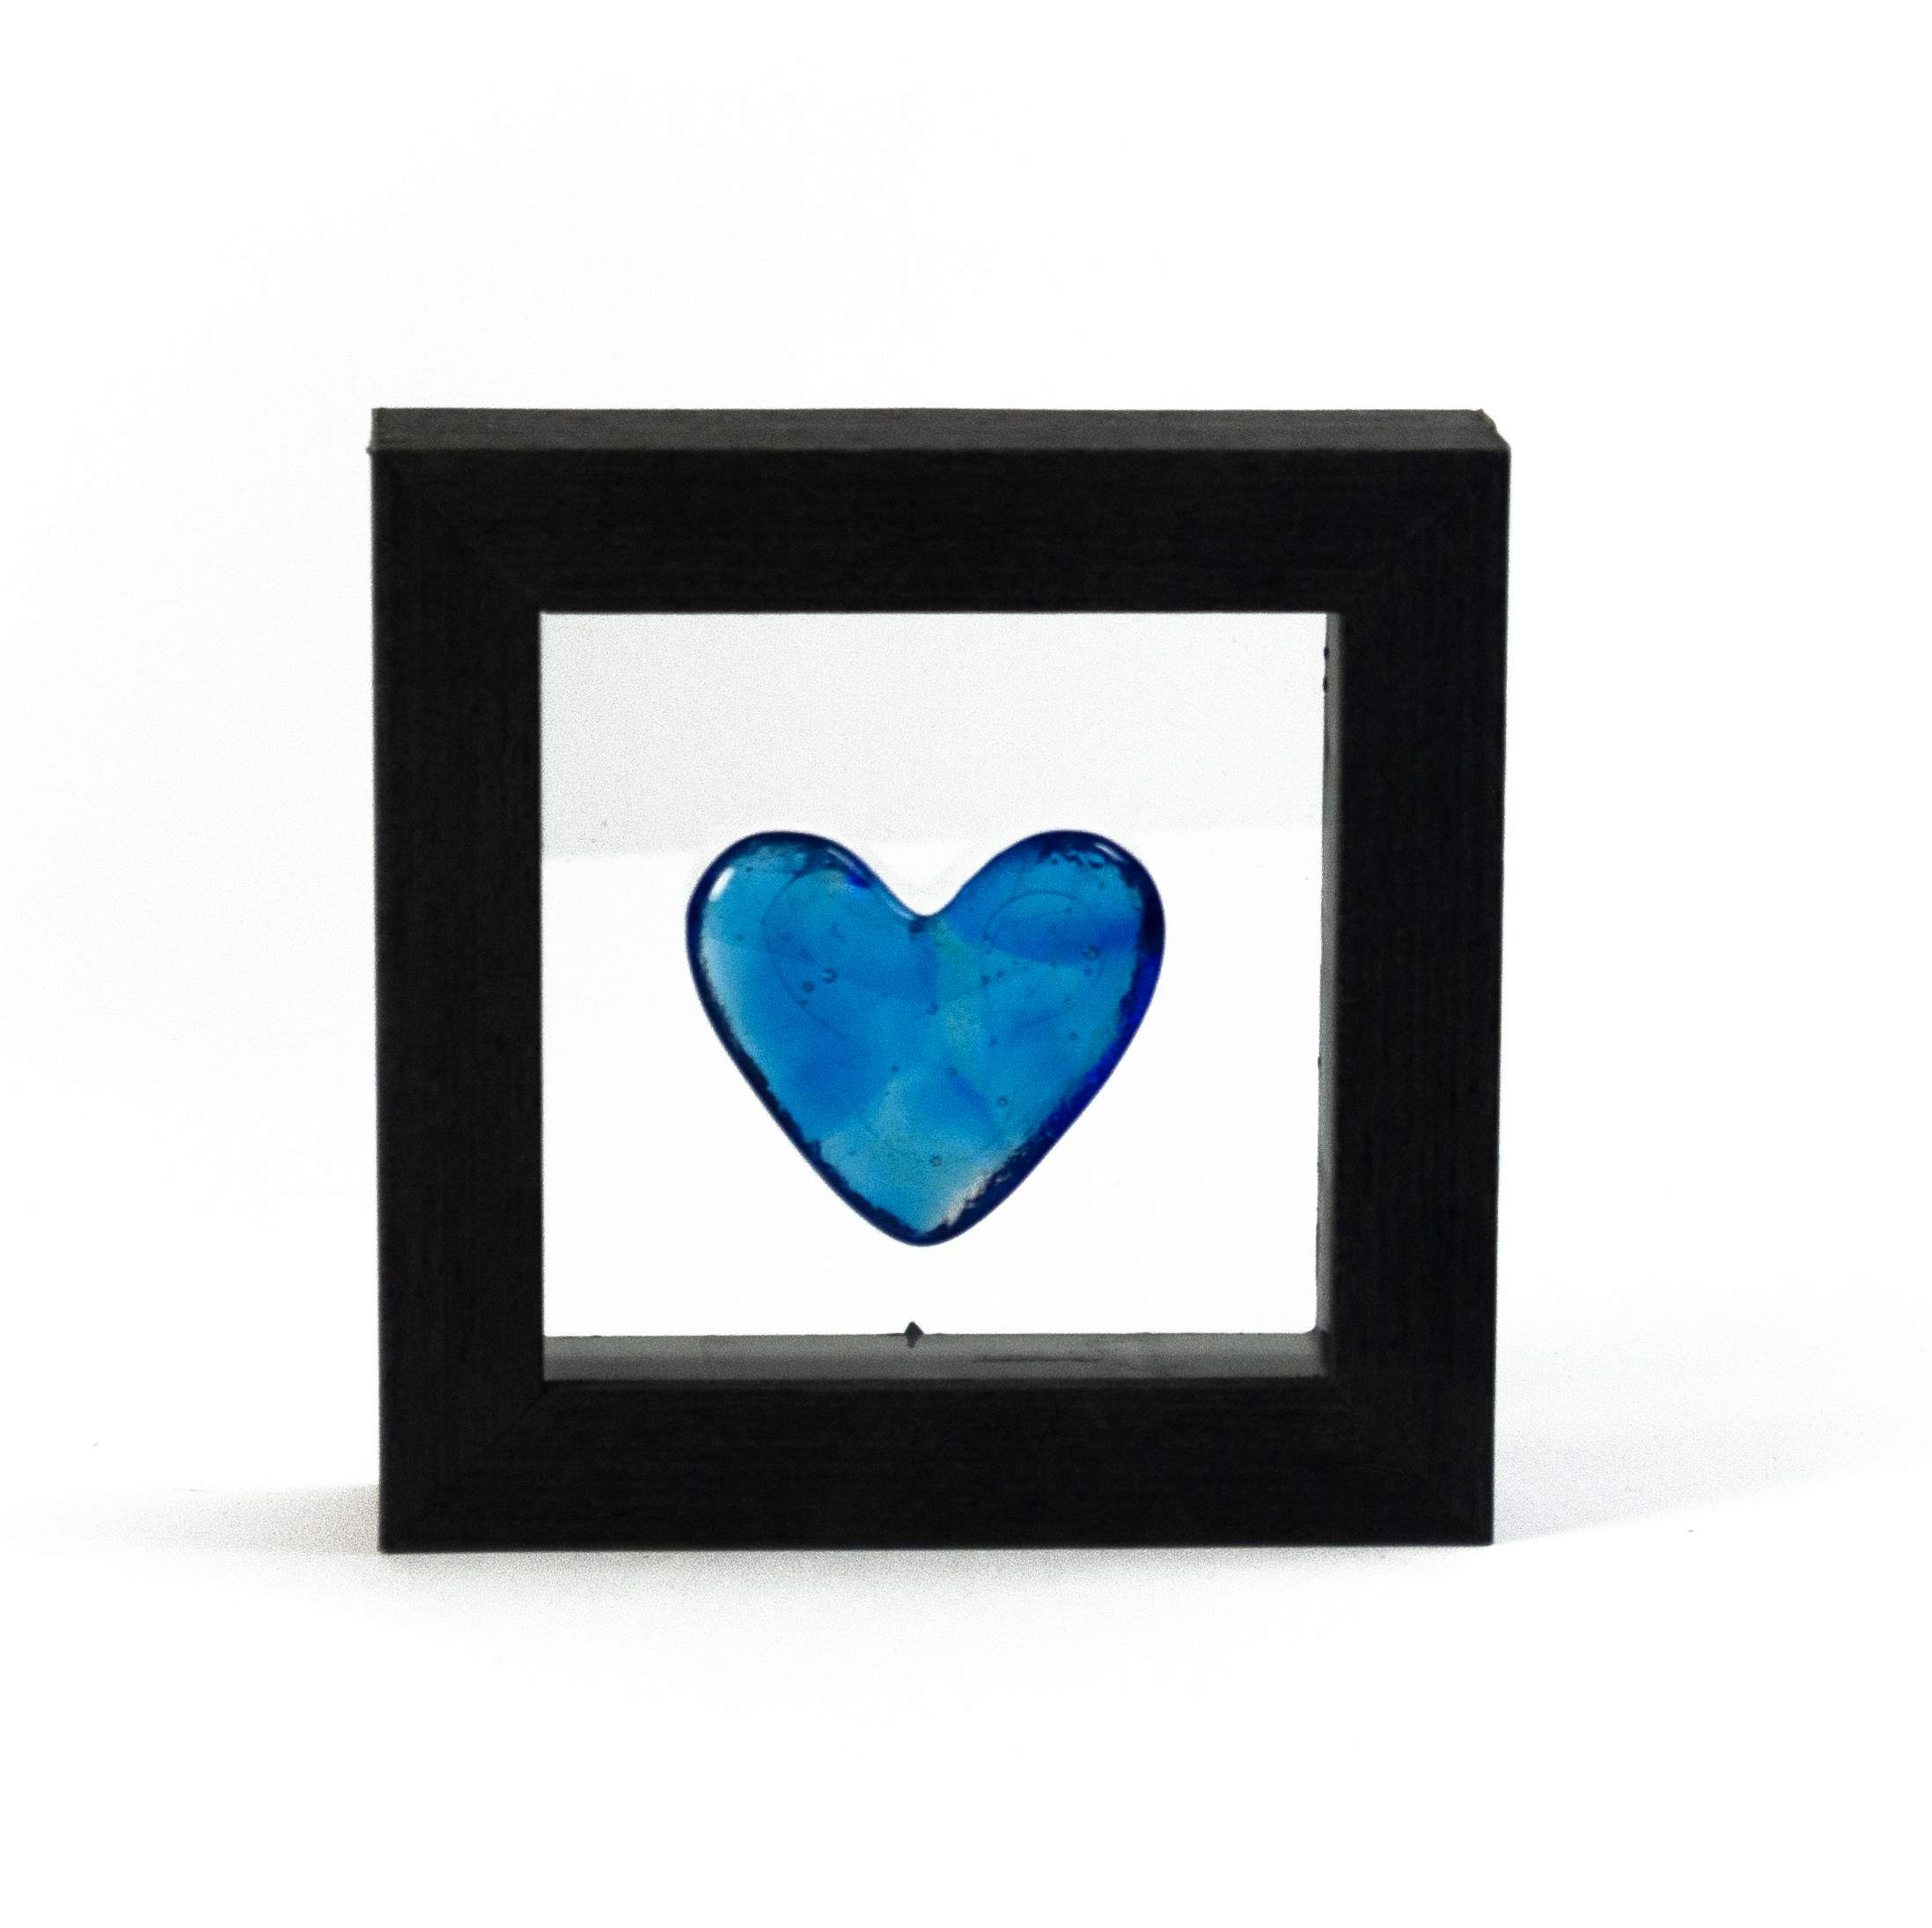 Small turquoise glass heart in a wood frame.